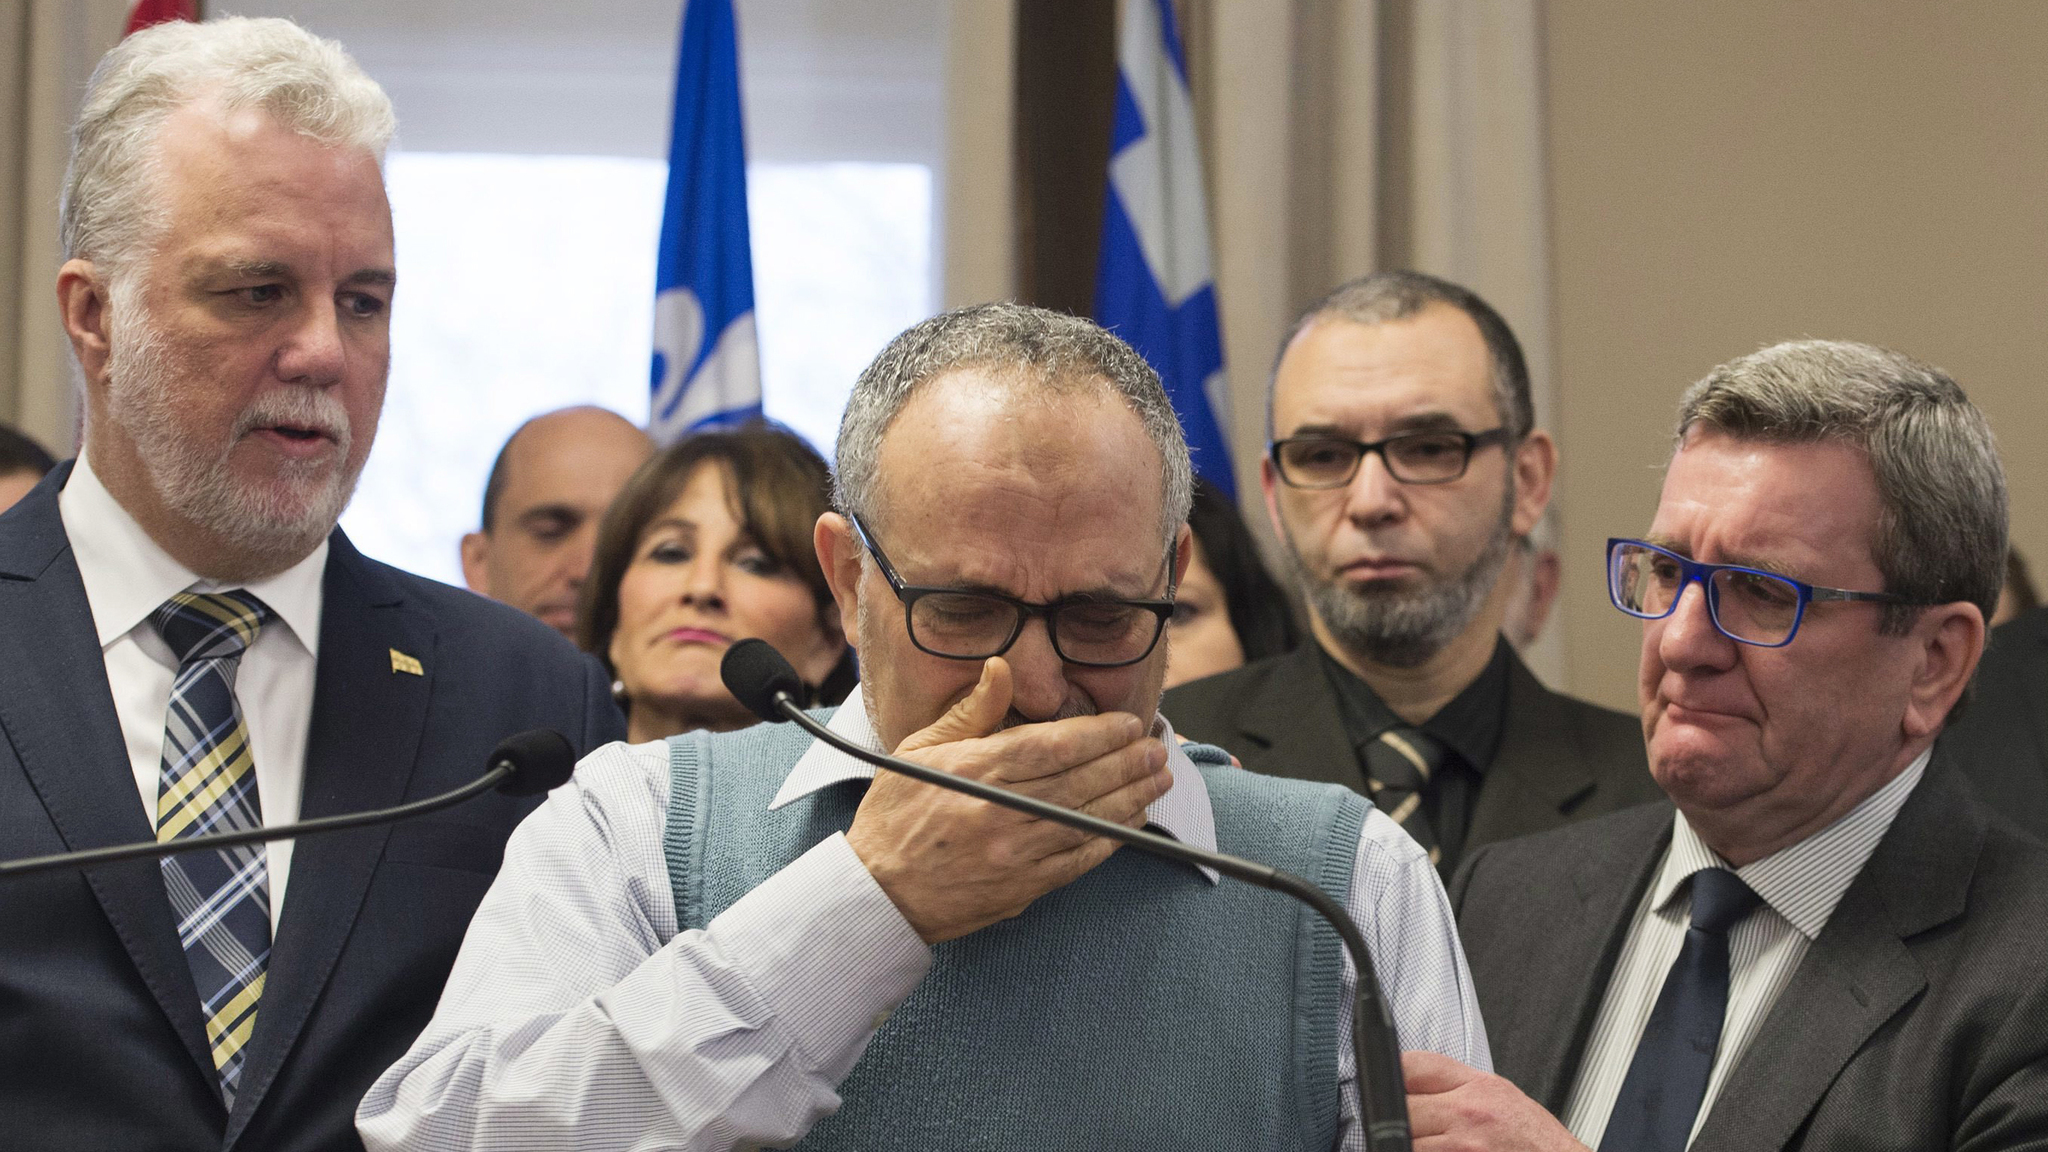 Mohamed Labidi, the vice-president of the mosque where an attack happened, is comforted by Quebec Premier Philippe Couillard, left, and Quebec City mayor Regis Labeaume, right, during a news conference Monday, Jan. 30, 2017, about the fatal shooting at the Quebec Islamic Cultural Centre on Sunday. Prime Minister Justin Trudeau and Couillard both characterized the attack at the mosque during evening prayers as a terrorist act. Jacques Boissinot | The Canadian Press)